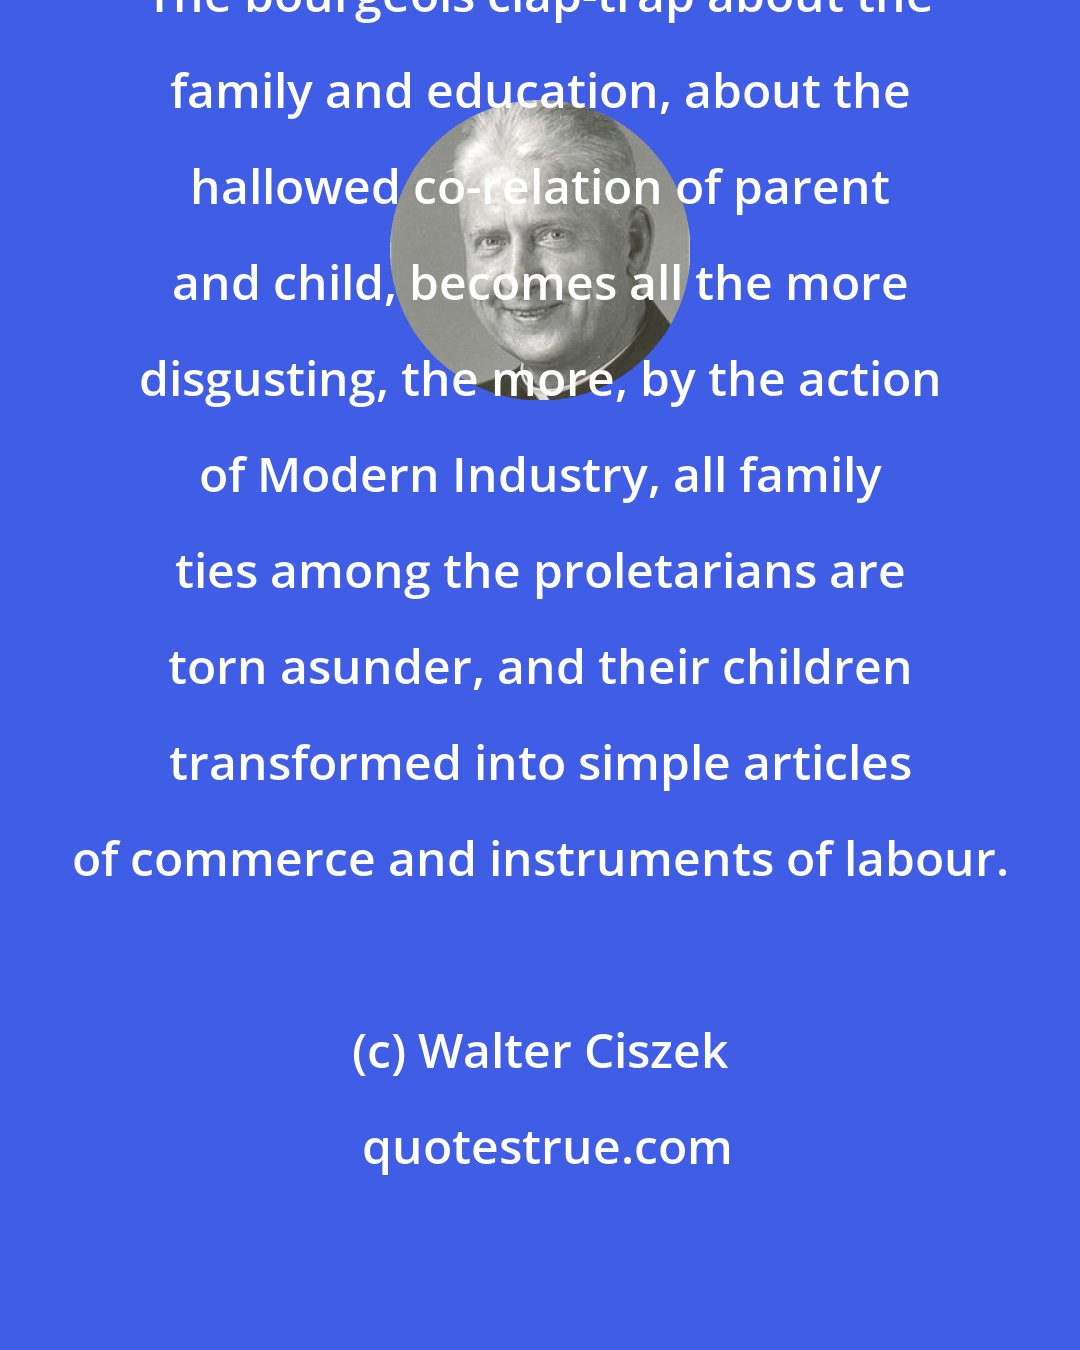 Walter Ciszek: The bourgeois clap-trap about the family and education, about the hallowed co-relation of parent and child, becomes all the more disgusting, the more, by the action of Modern Industry, all family ties among the proletarians are torn asunder, and their children transformed into simple articles of commerce and instruments of labour.